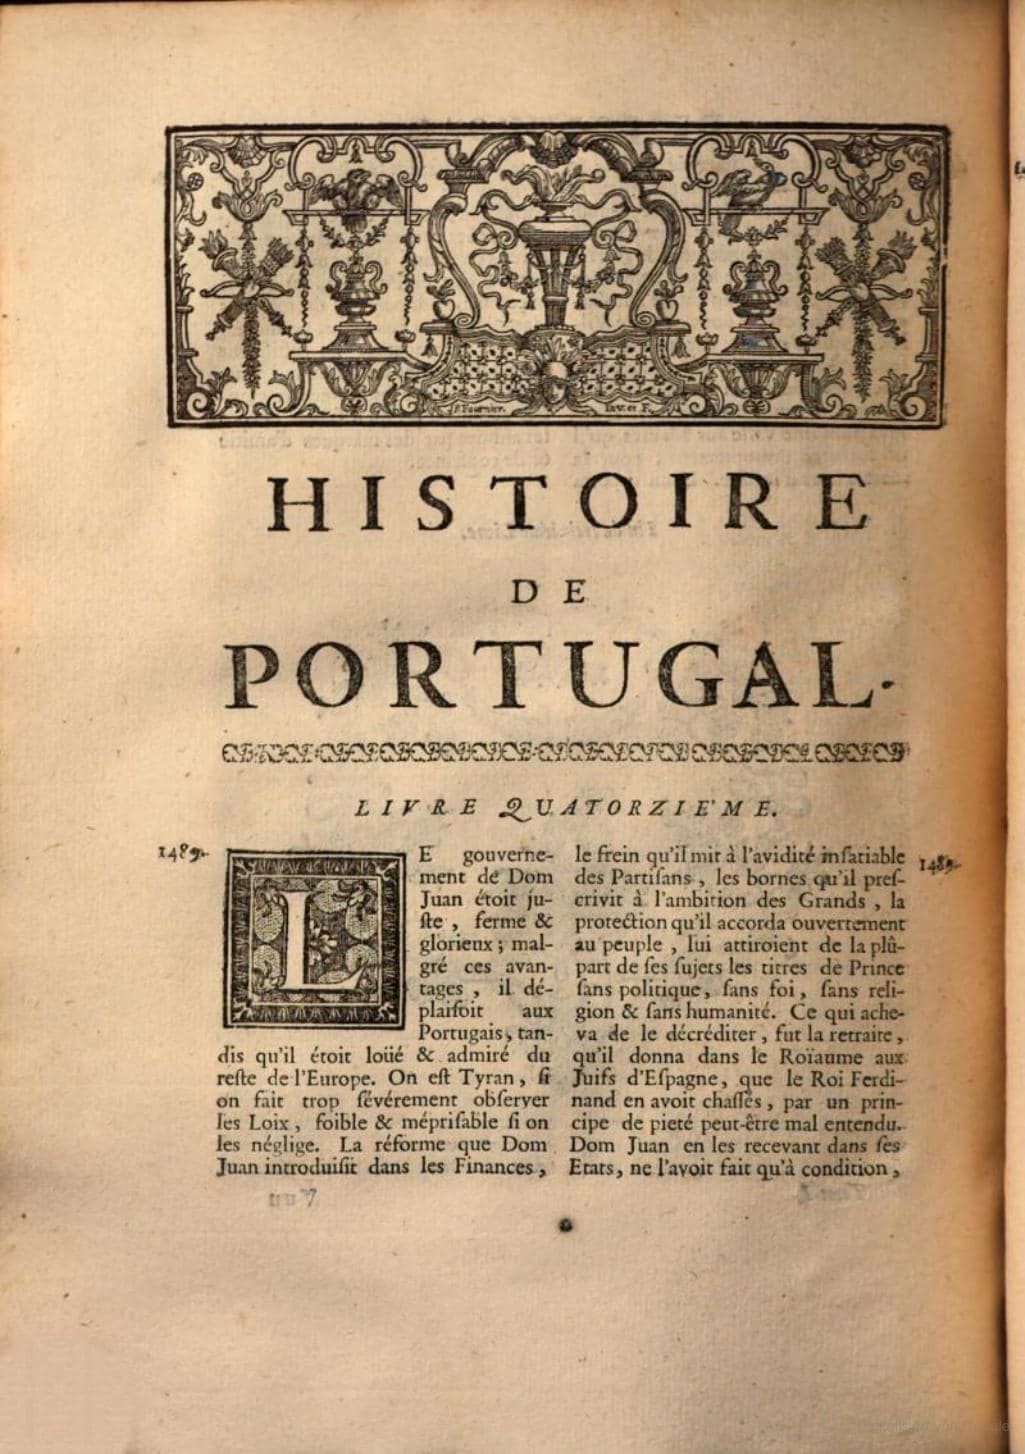 Losseau-Senegal Relations Through Stories of Portuguese Christians at the Residence of Prince Wolof Bom Delene Tas Ndiaye in Portugal in November 1488